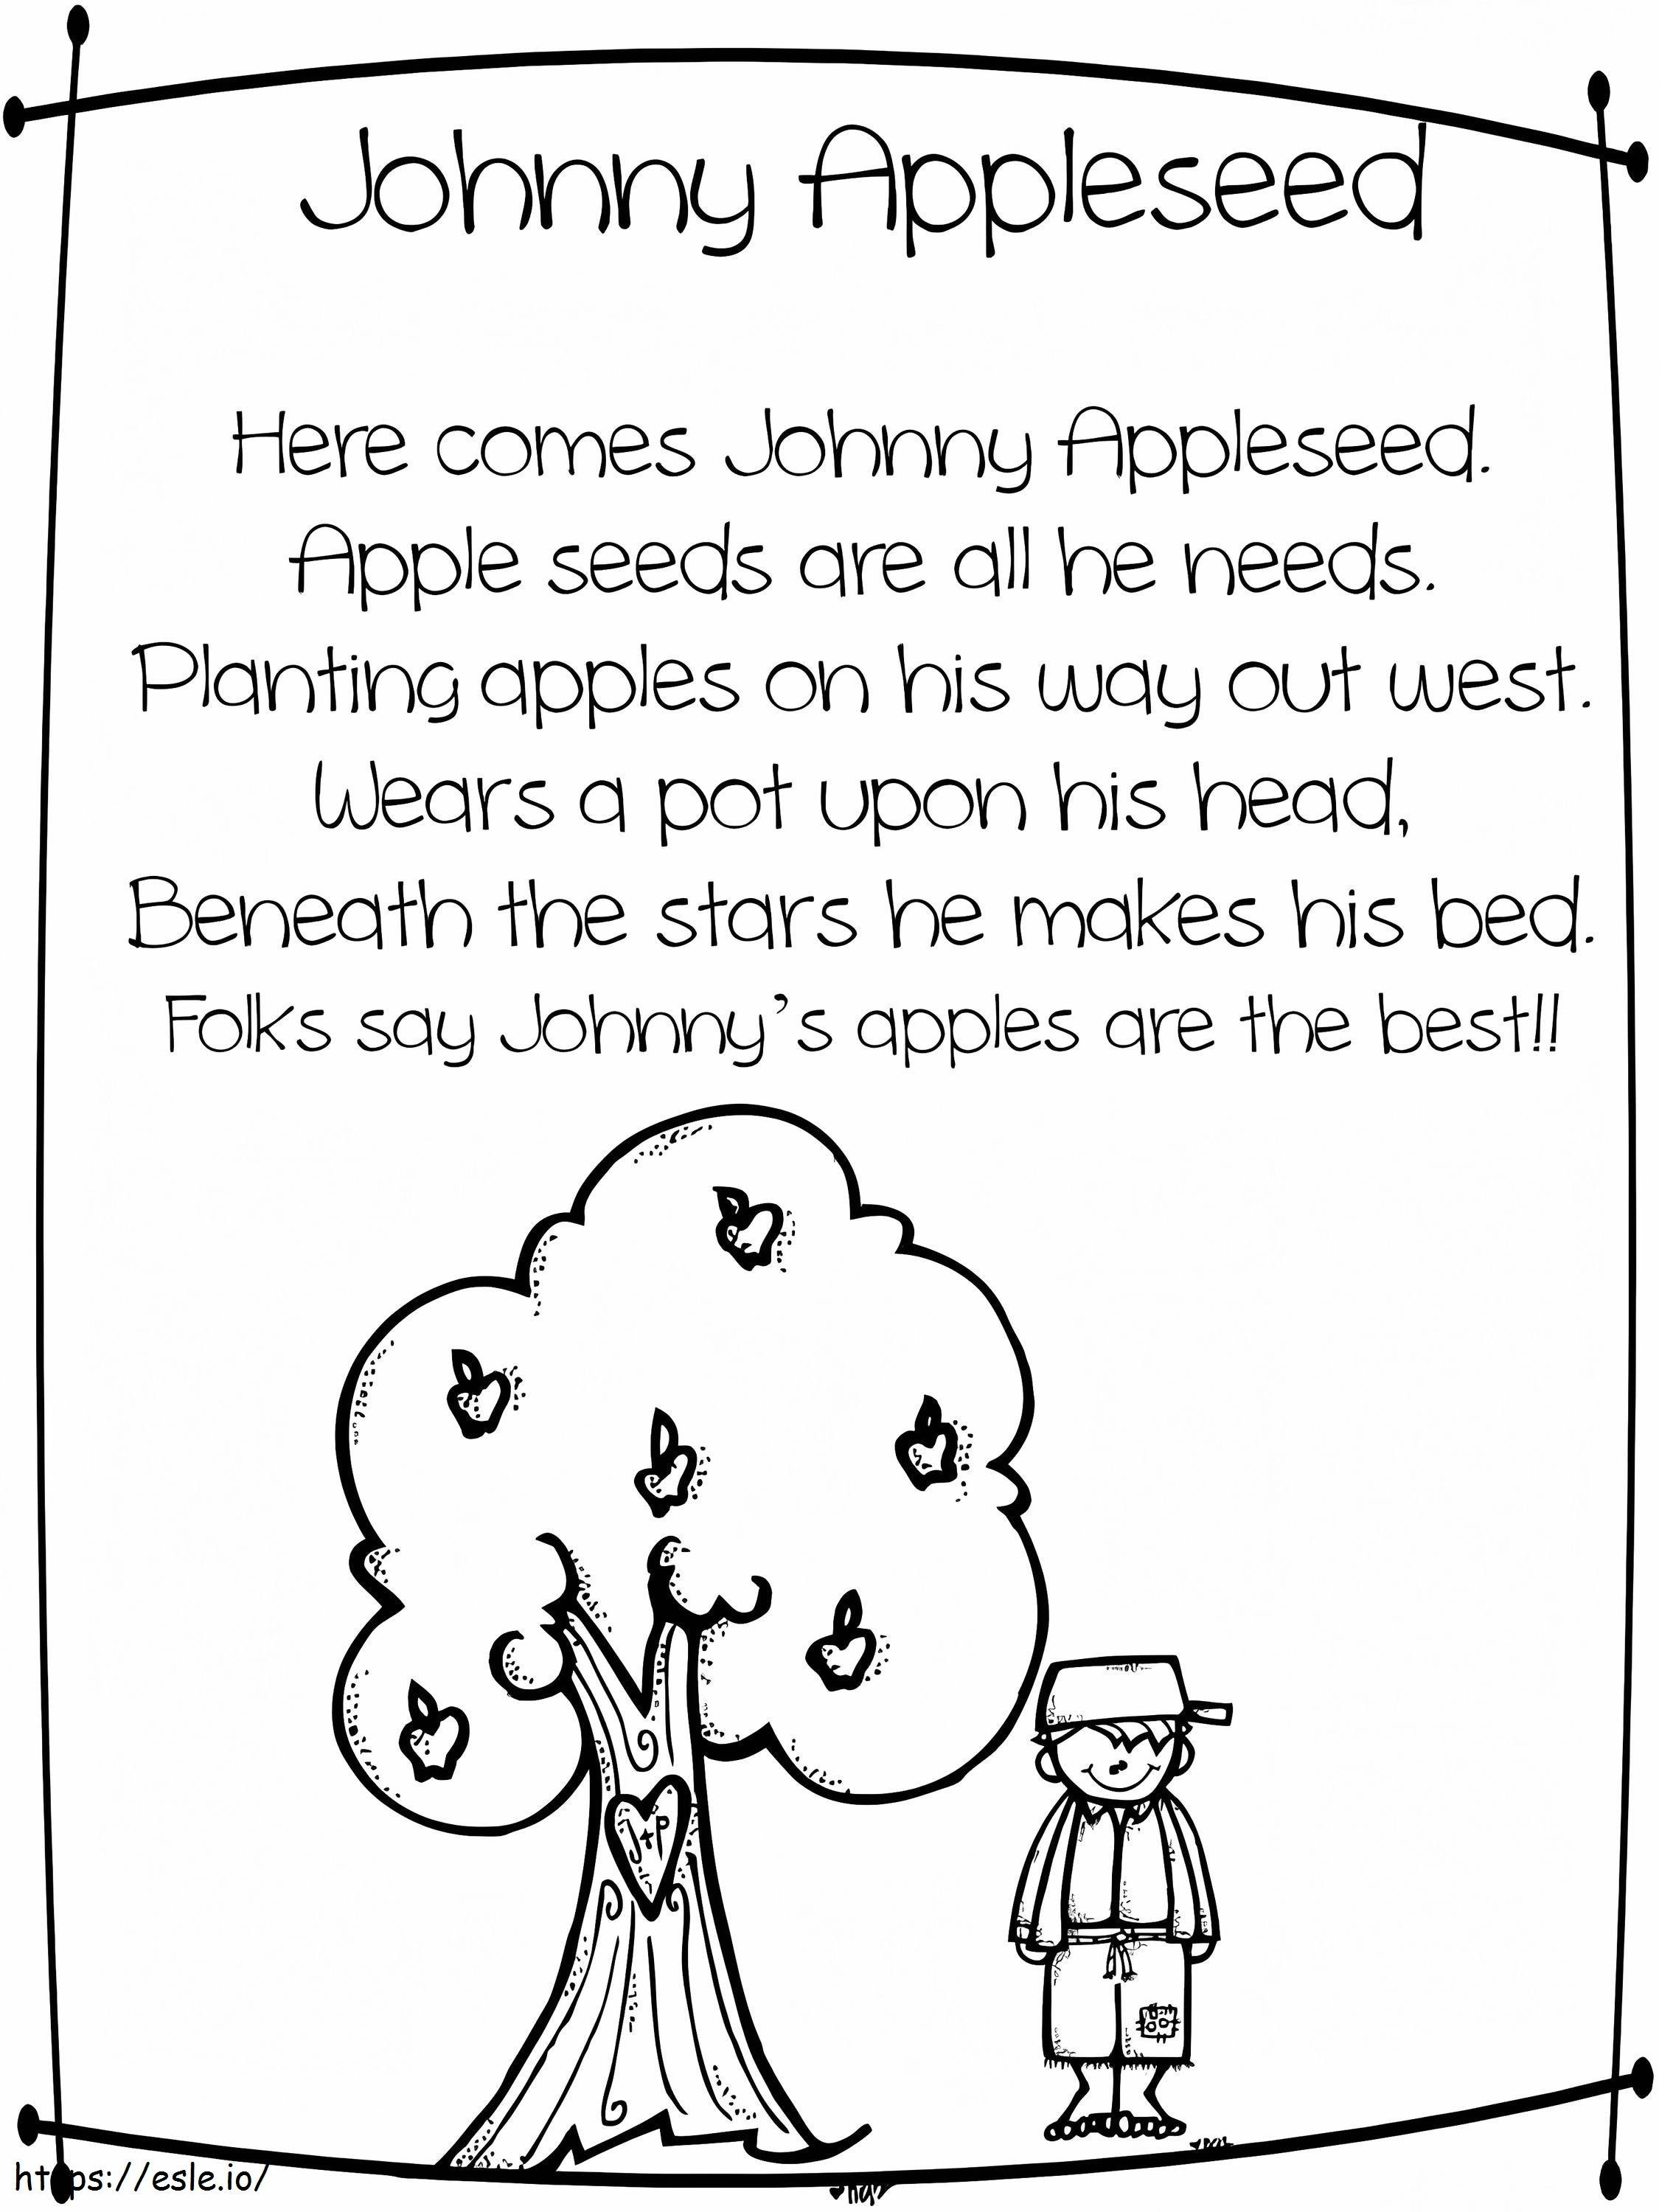 Johnny Appleseed 2 coloring page